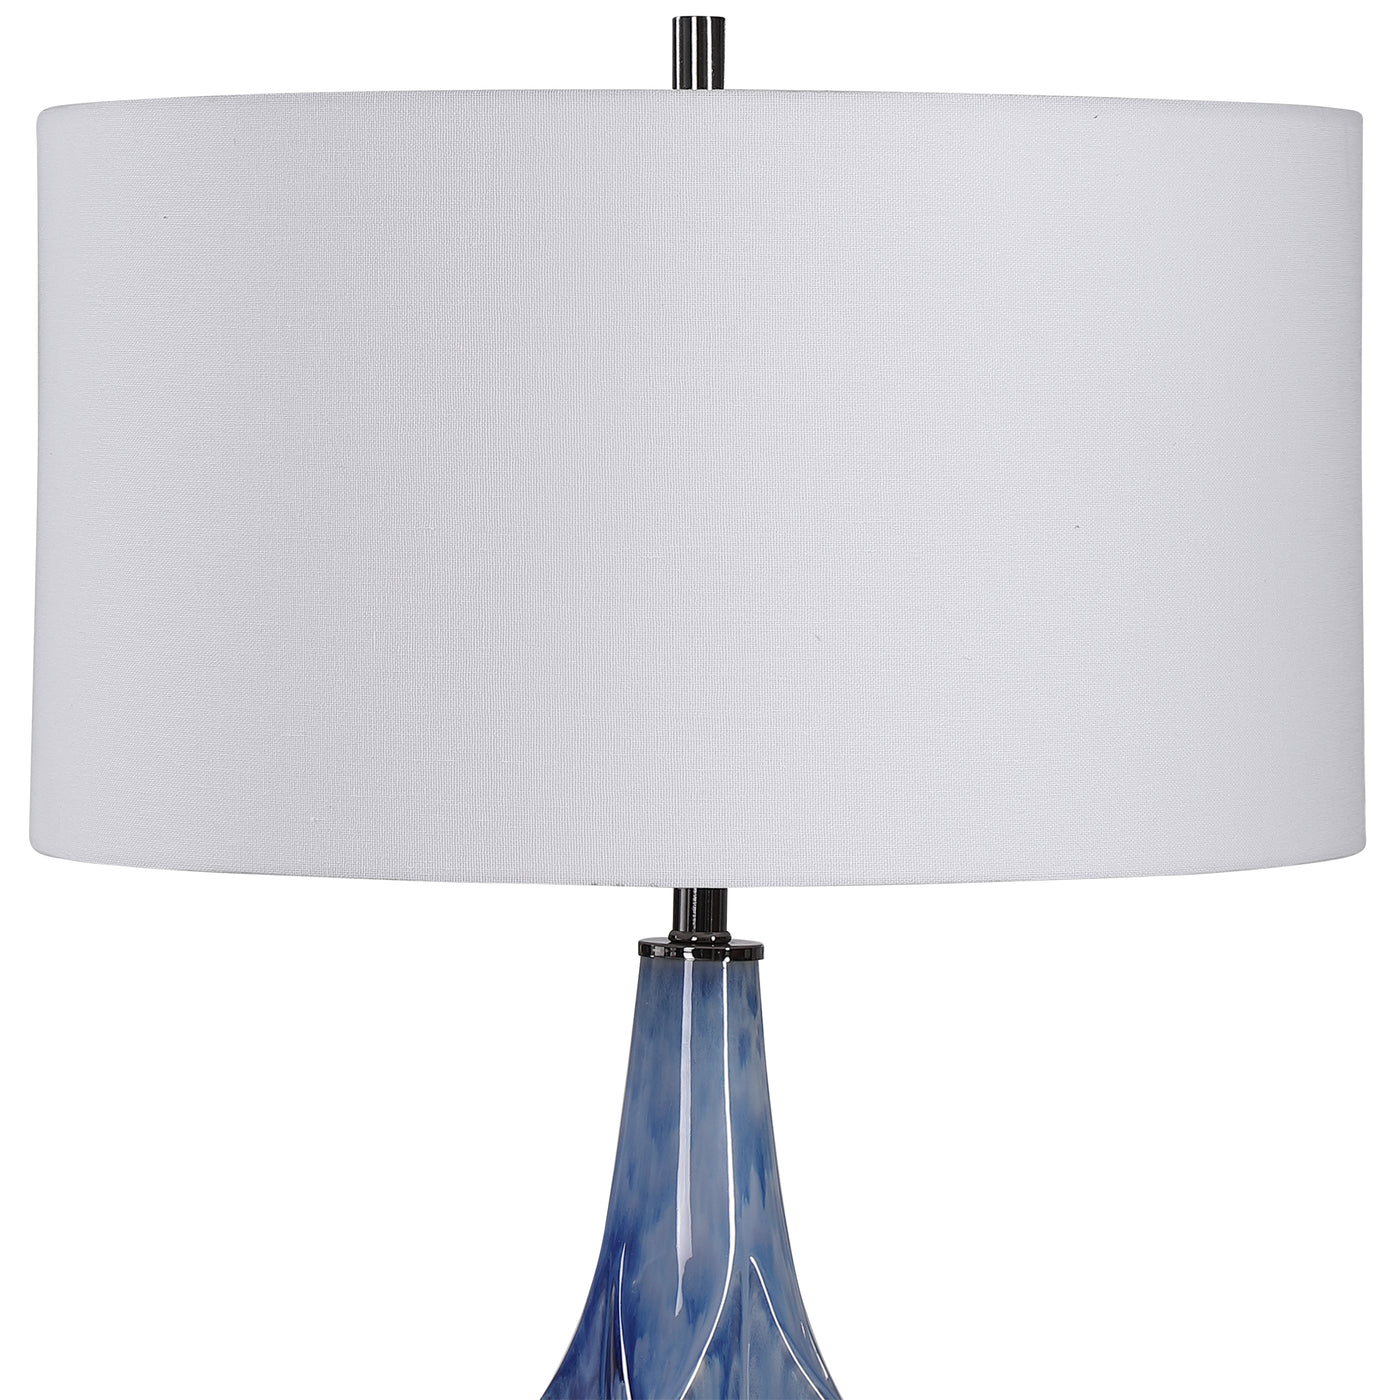 This Ceramic Table Lamp Is Finished In A Beautiful Reactive Indigo Blue Glaze, Accented By Elegant, Polished Nickel And Cr...